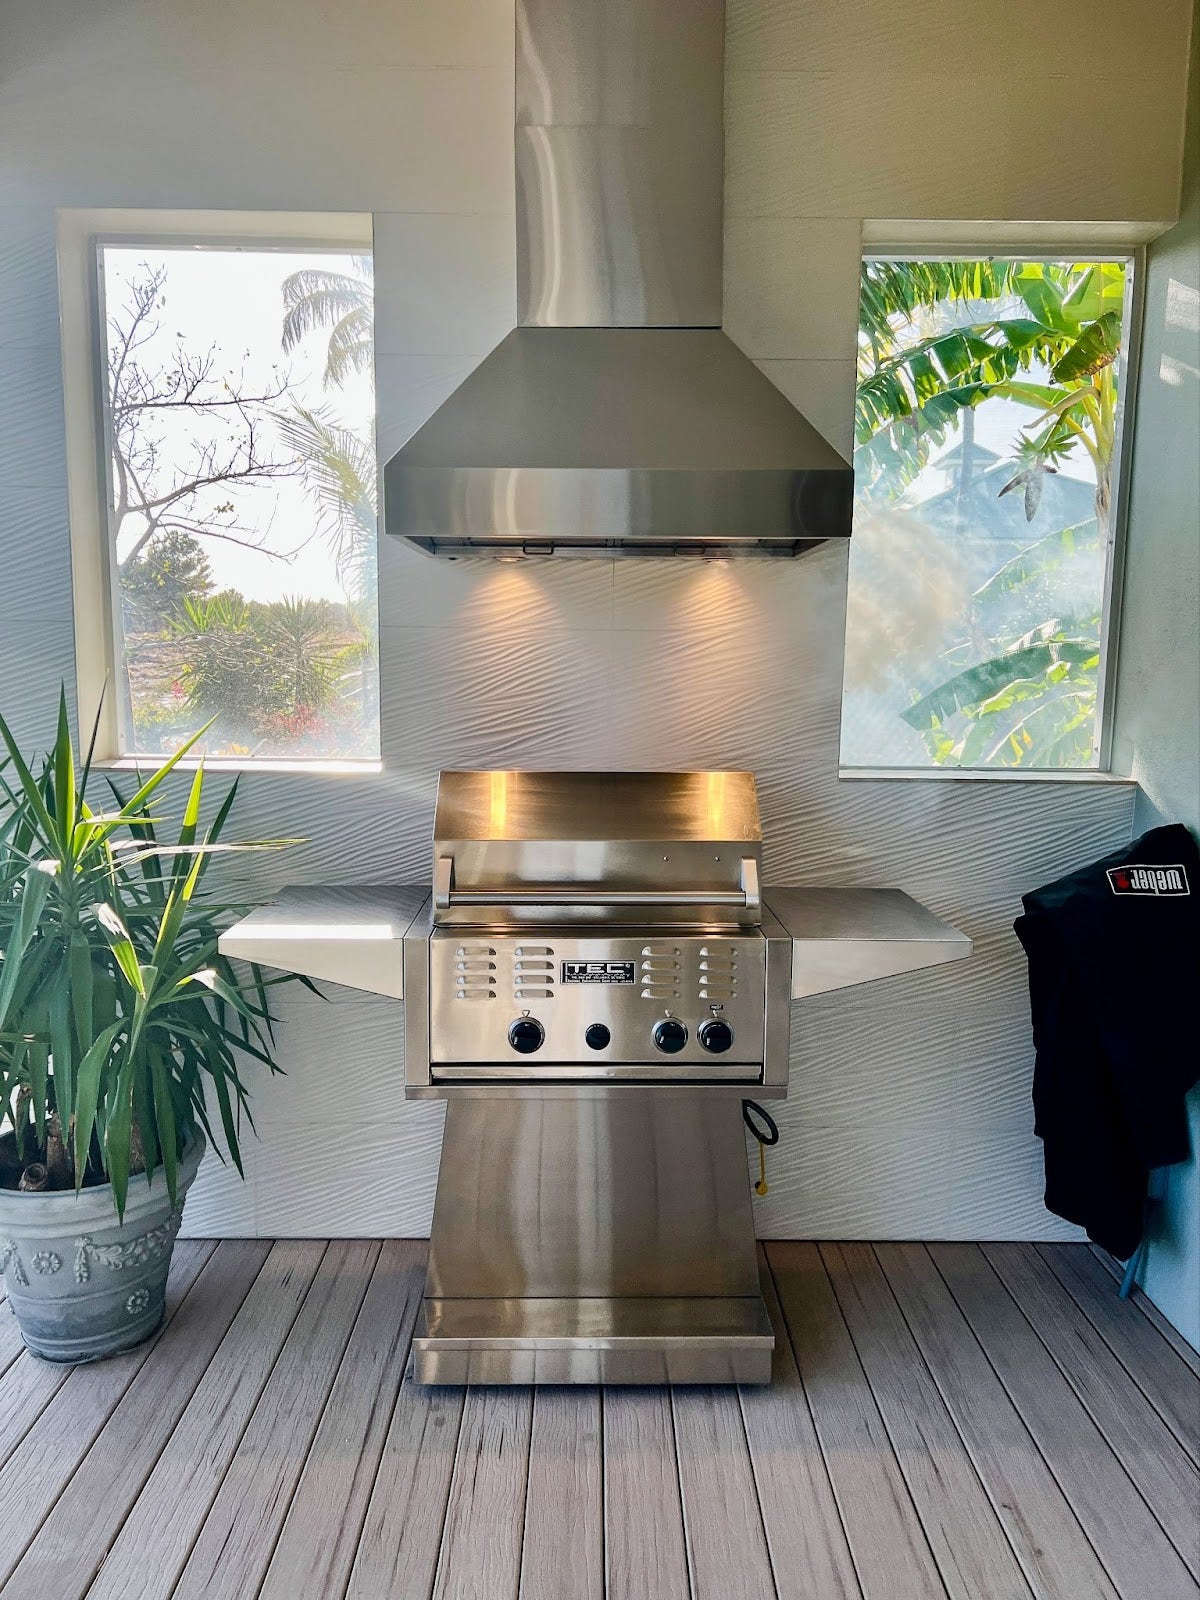 Sleek and minimalistic outdoor kitchen with a powerful range hood, set against a backdrop of modern landscaping and ambient lighting -prolinerangehoods.com.